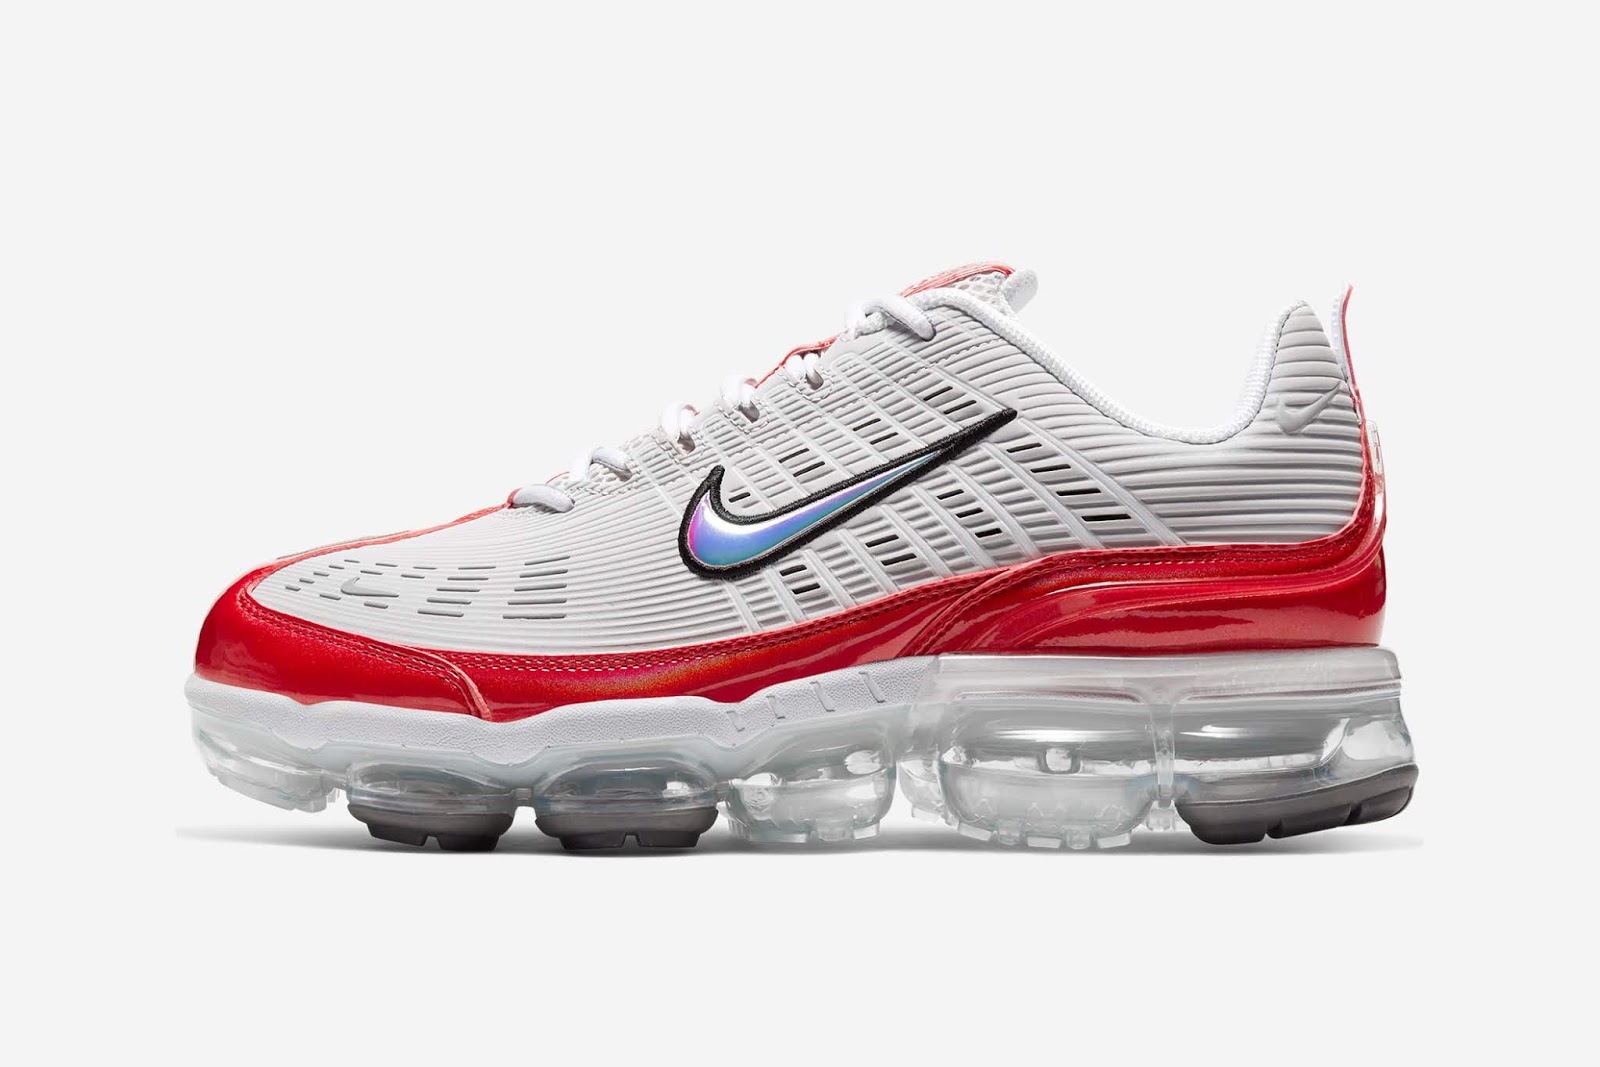 Swag Craze: First Look: Nike Air VaporMax 360 - Red/Vast Grey/White